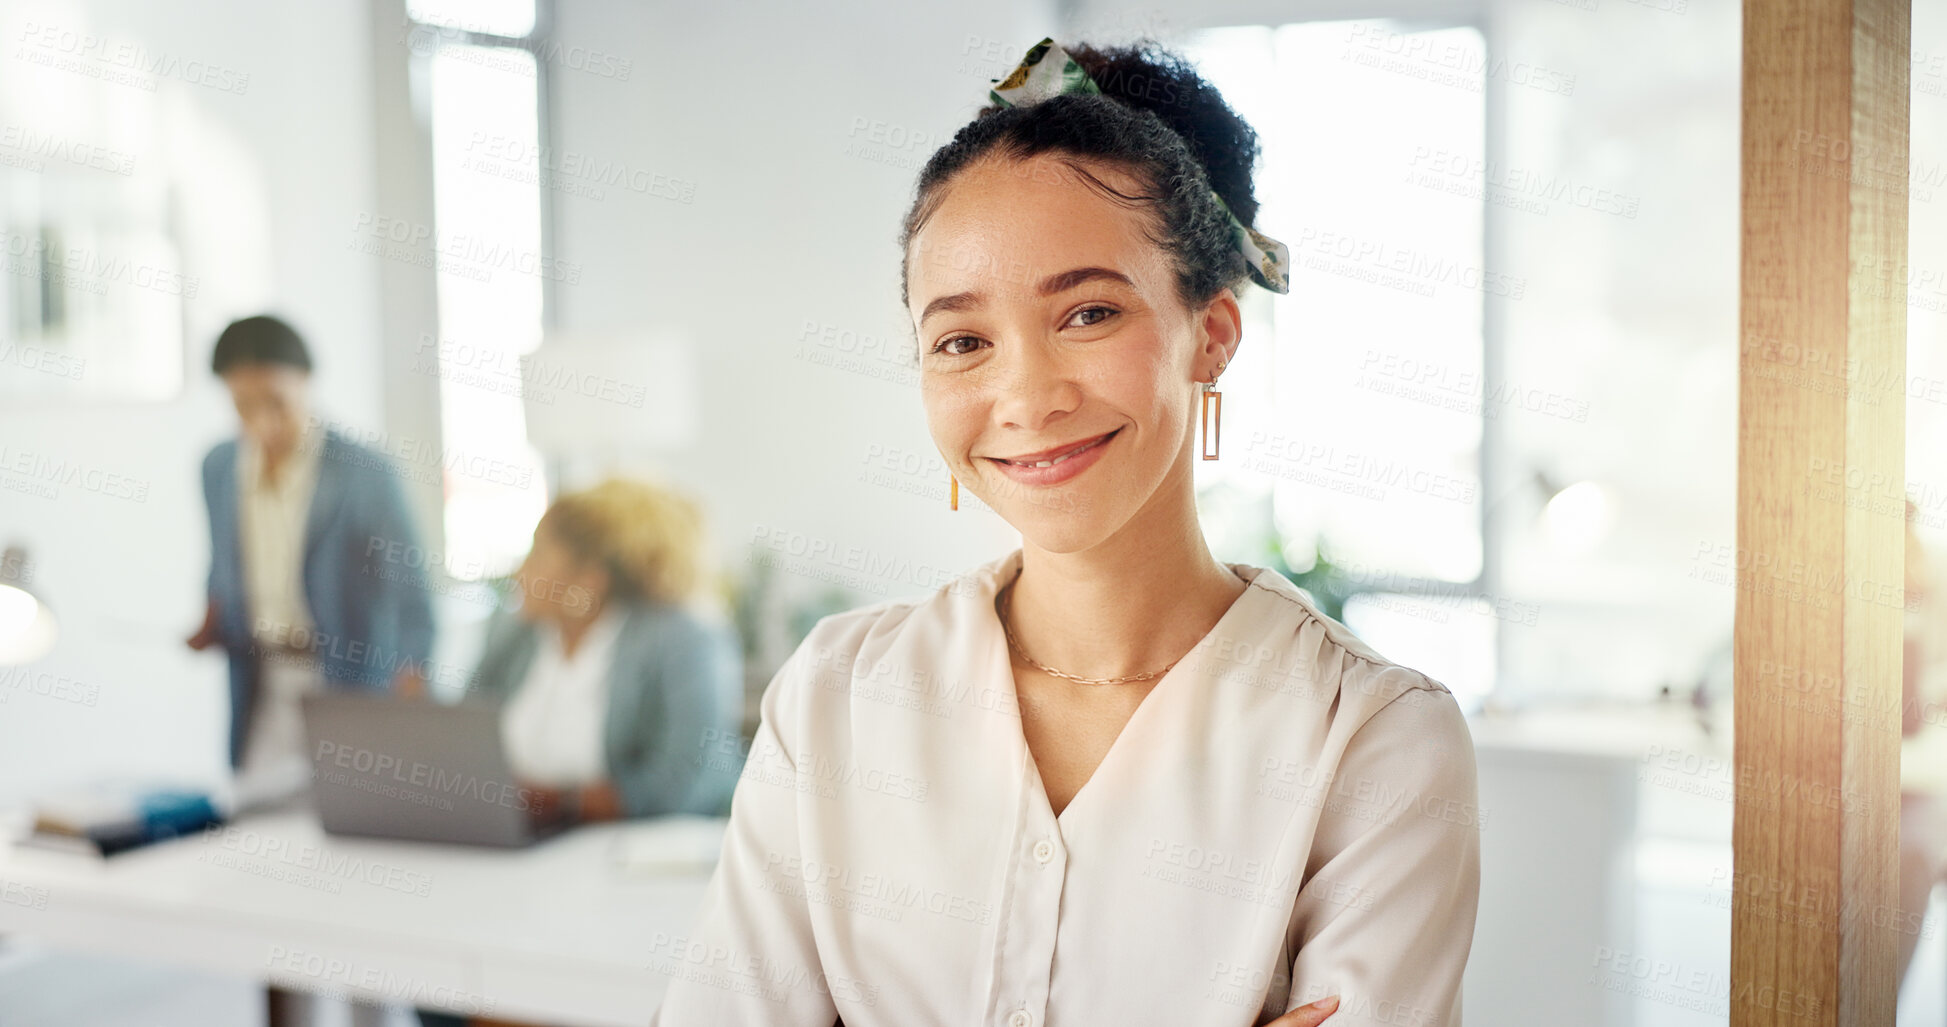 Buy stock photo Portrait, smile and business woman in startup company, office or creative workplace for pride in career. Happy face, confidence and professional entrepreneur, female designer or employee coworking